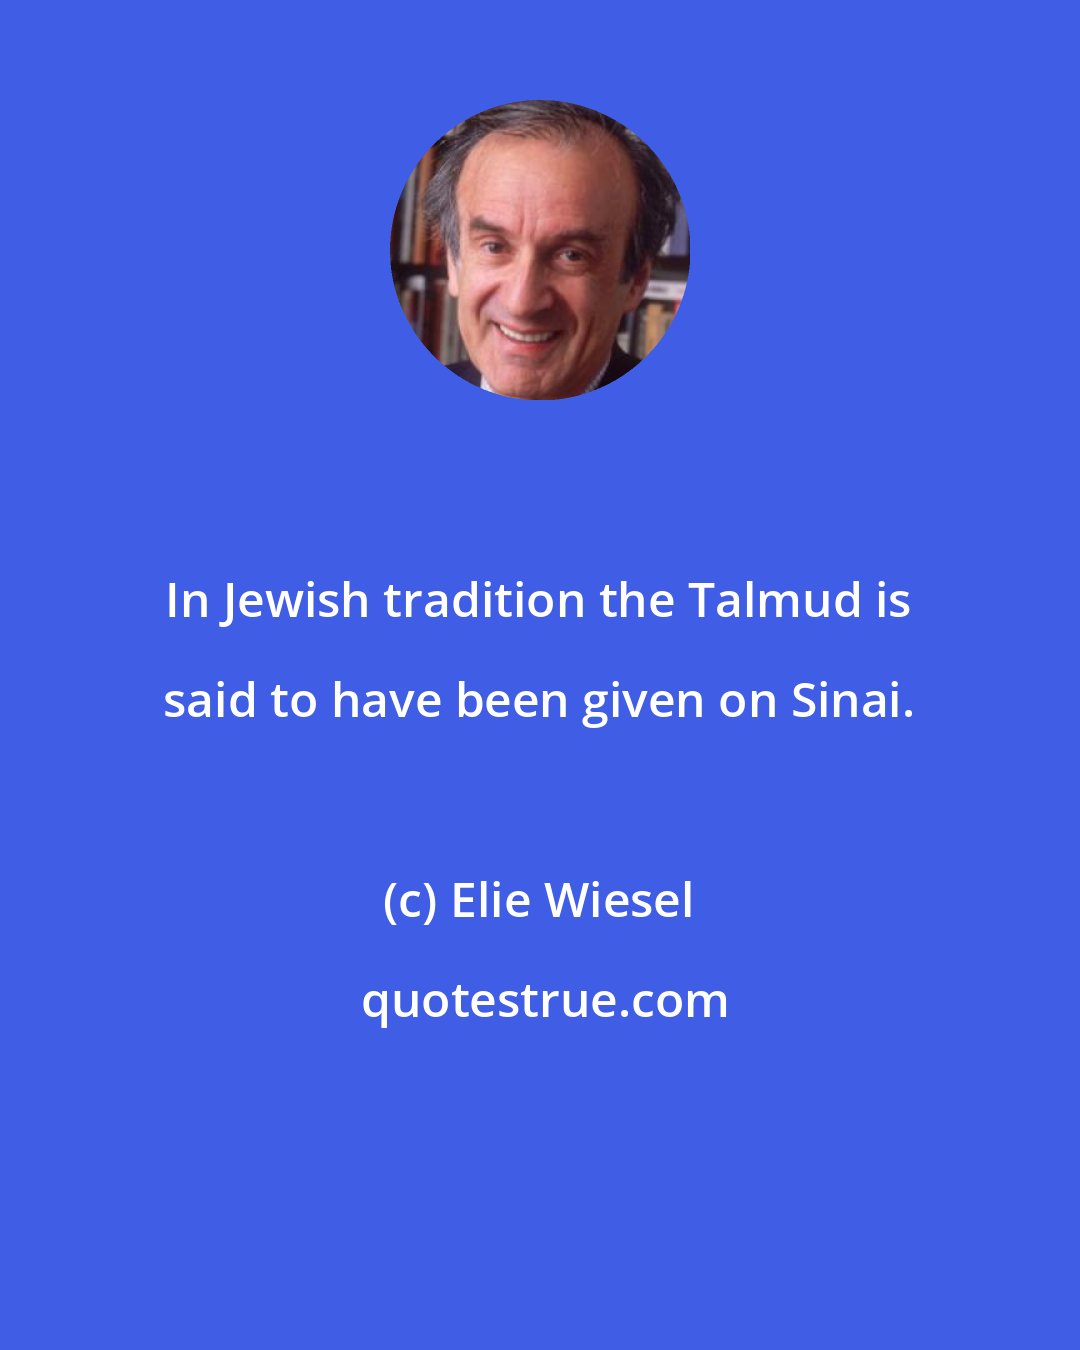 Elie Wiesel: In Jewish tradition the Talmud is said to have been given on Sinai.